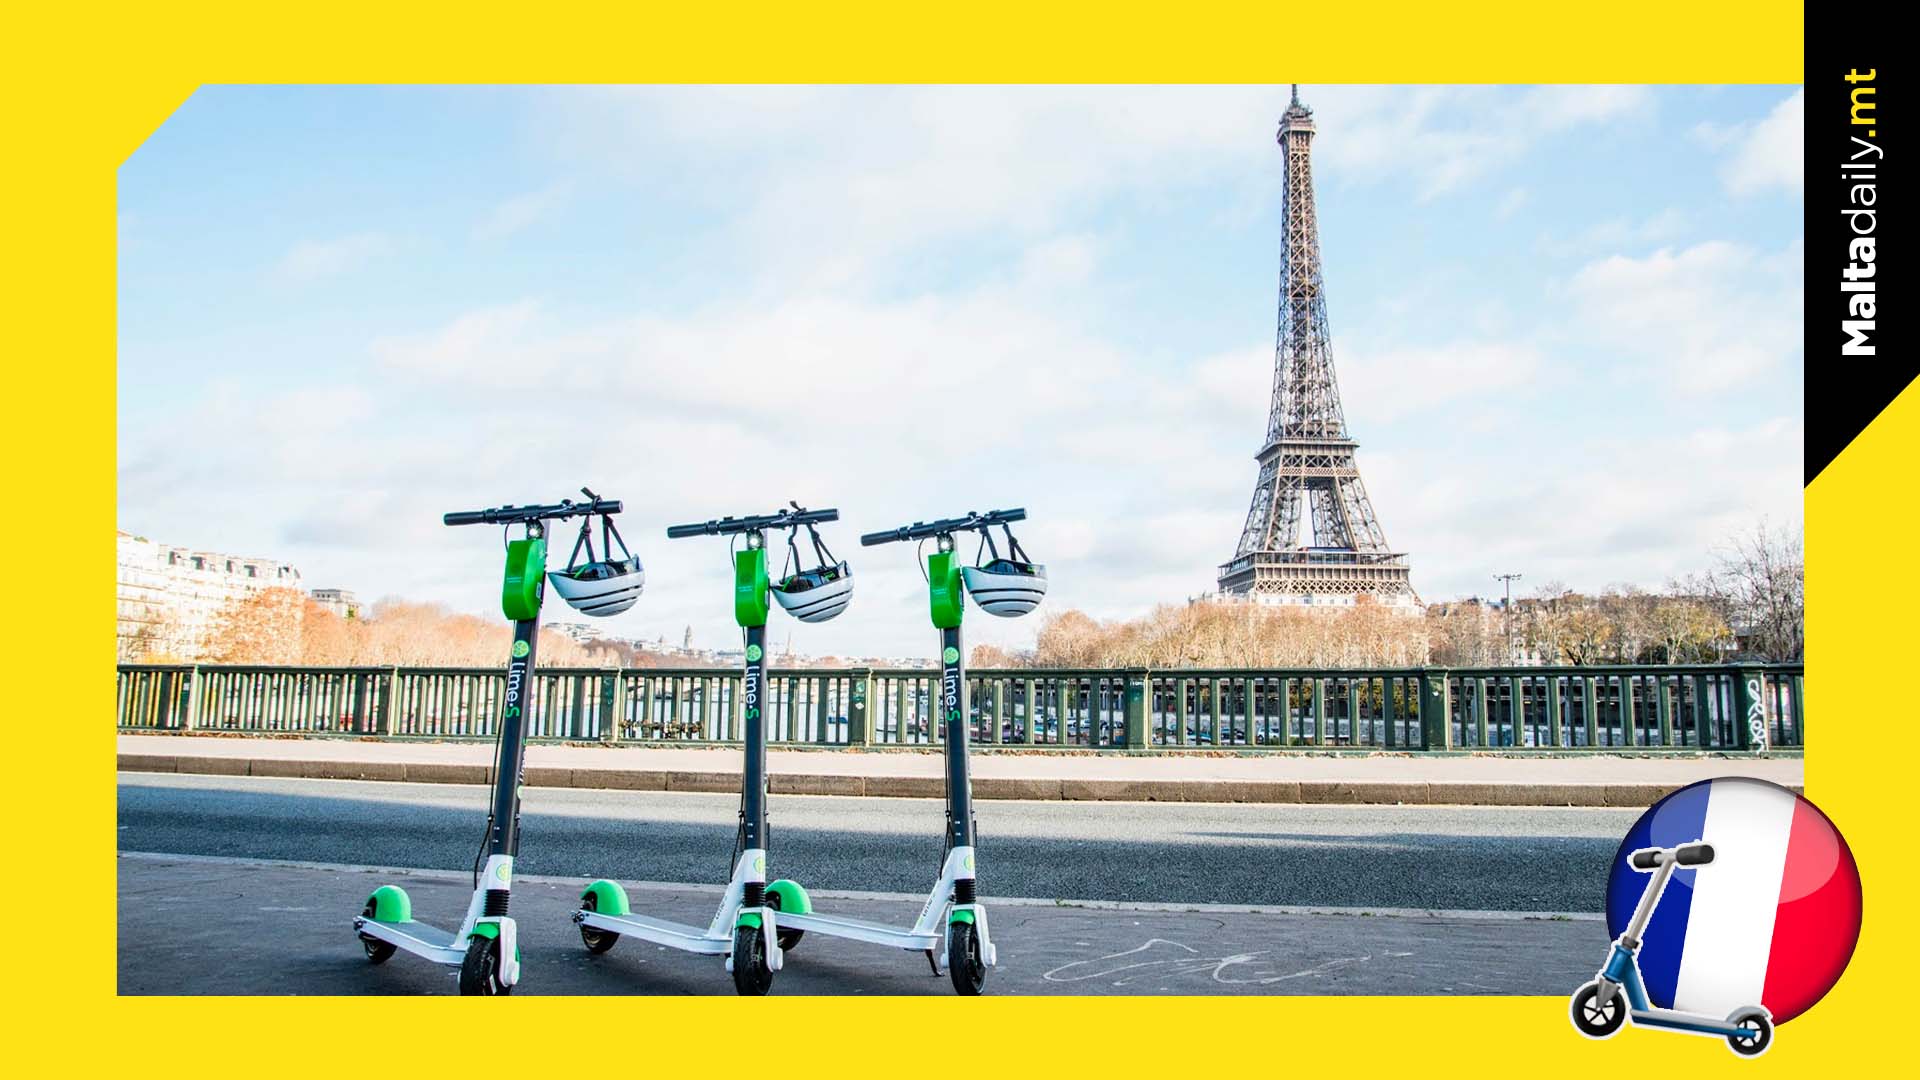 Paris votes to ban rental e-scooter use in the city